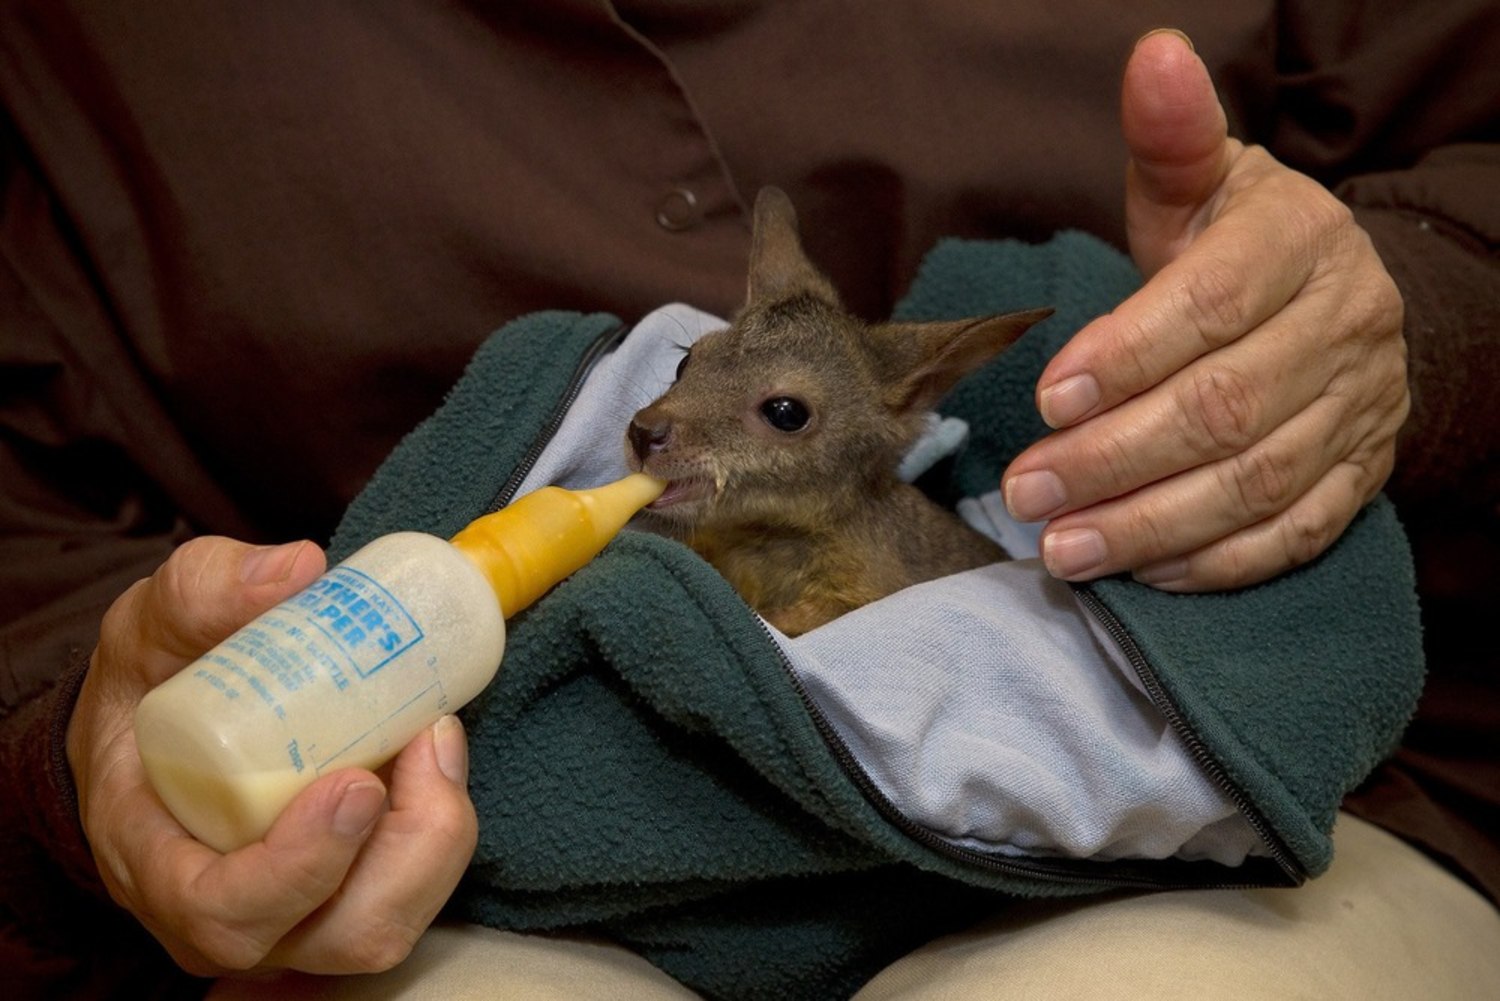 Zoo caring for abandoned newborn wallaby